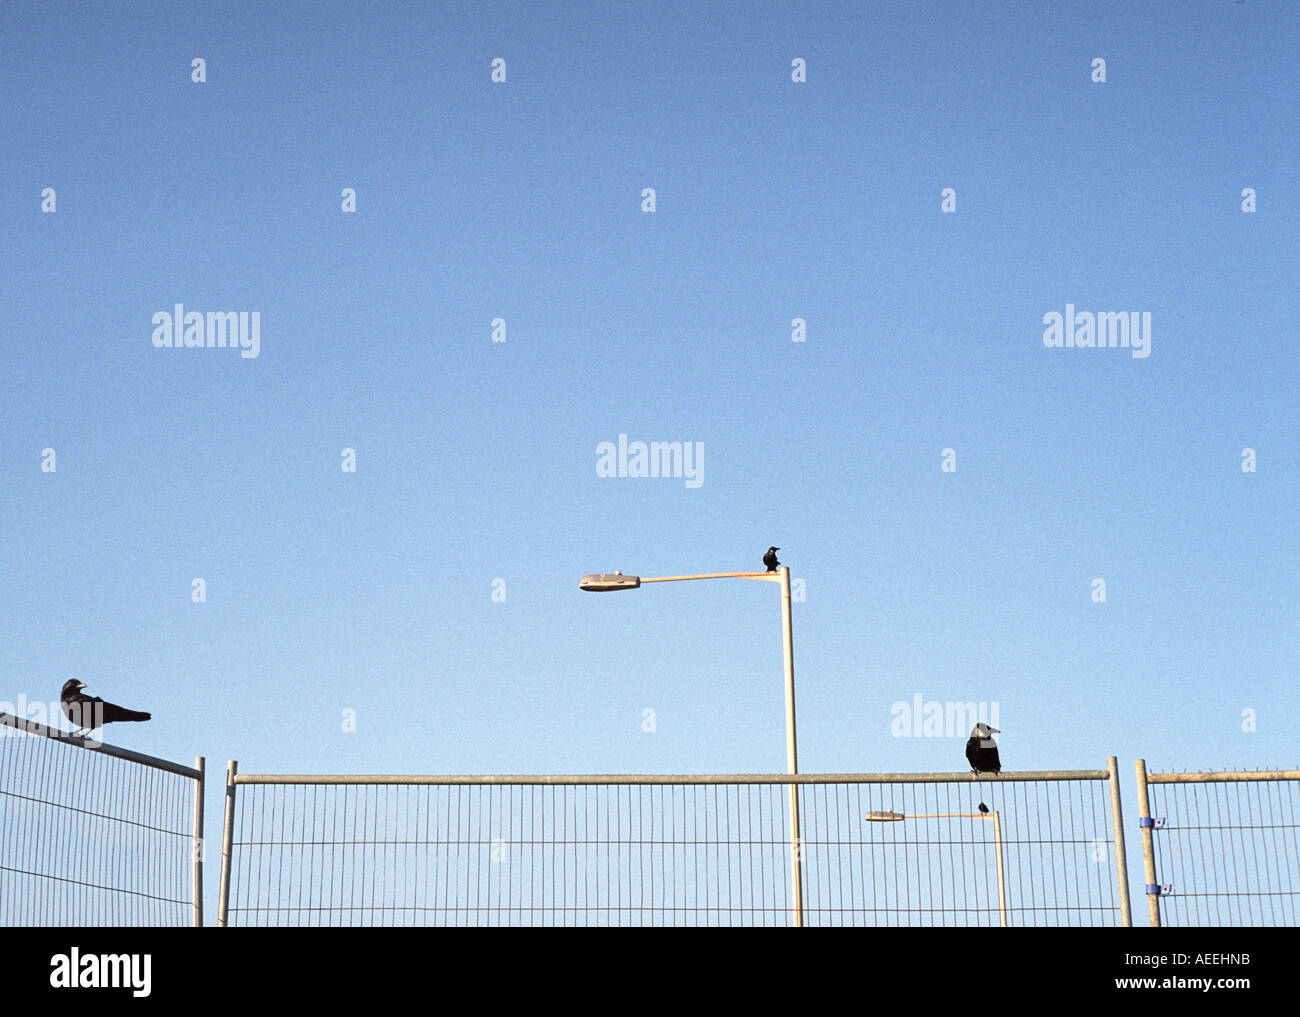 crows on fencing in front of blue sky Stock Photo